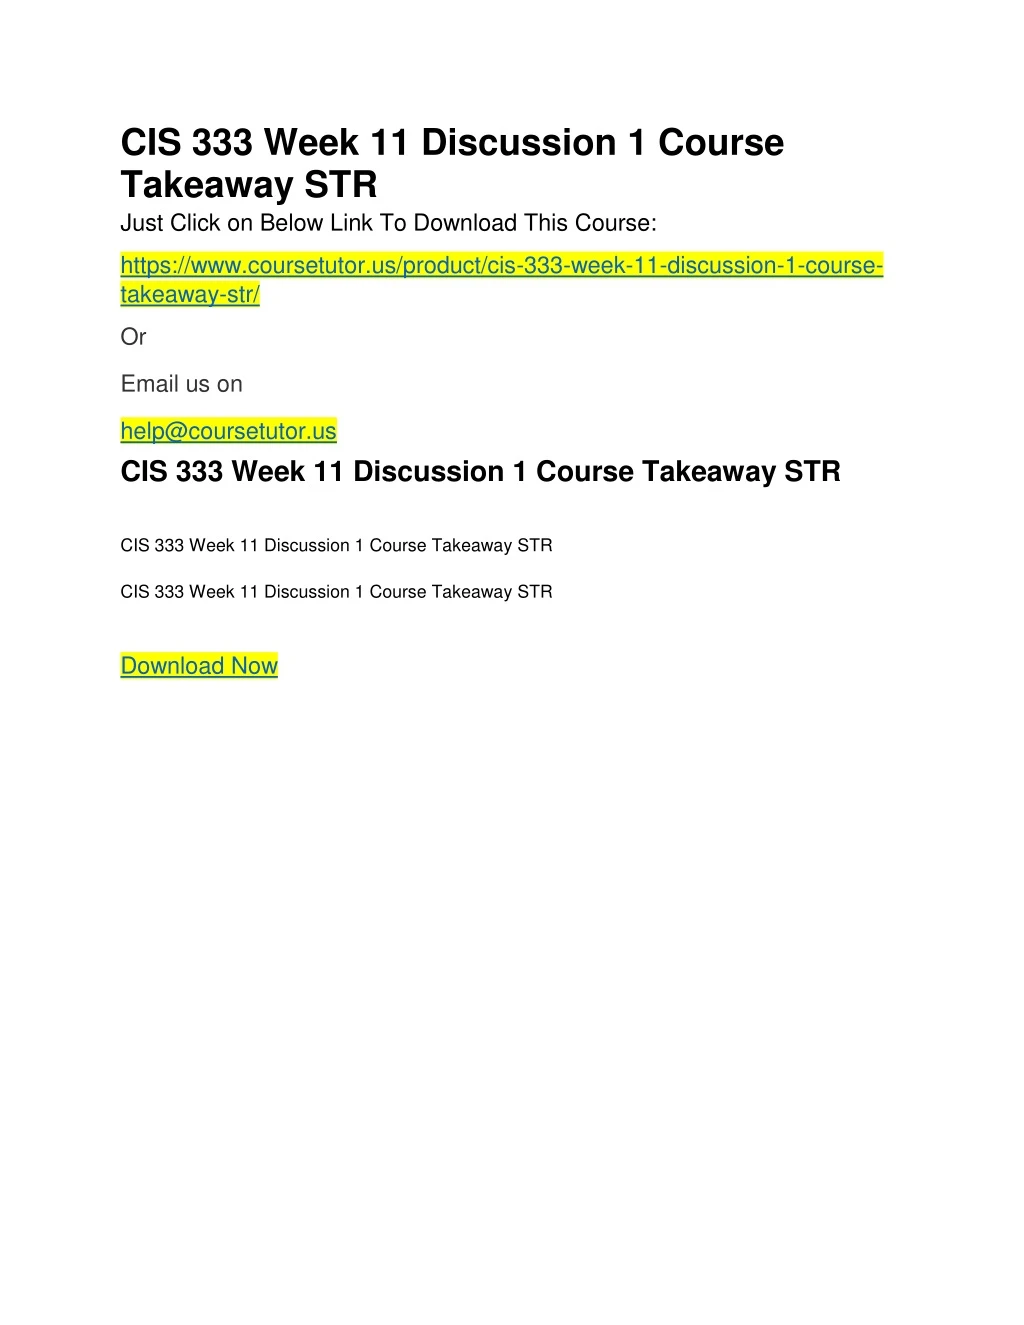 cis 333 week 11 discussion 1 course takeaway